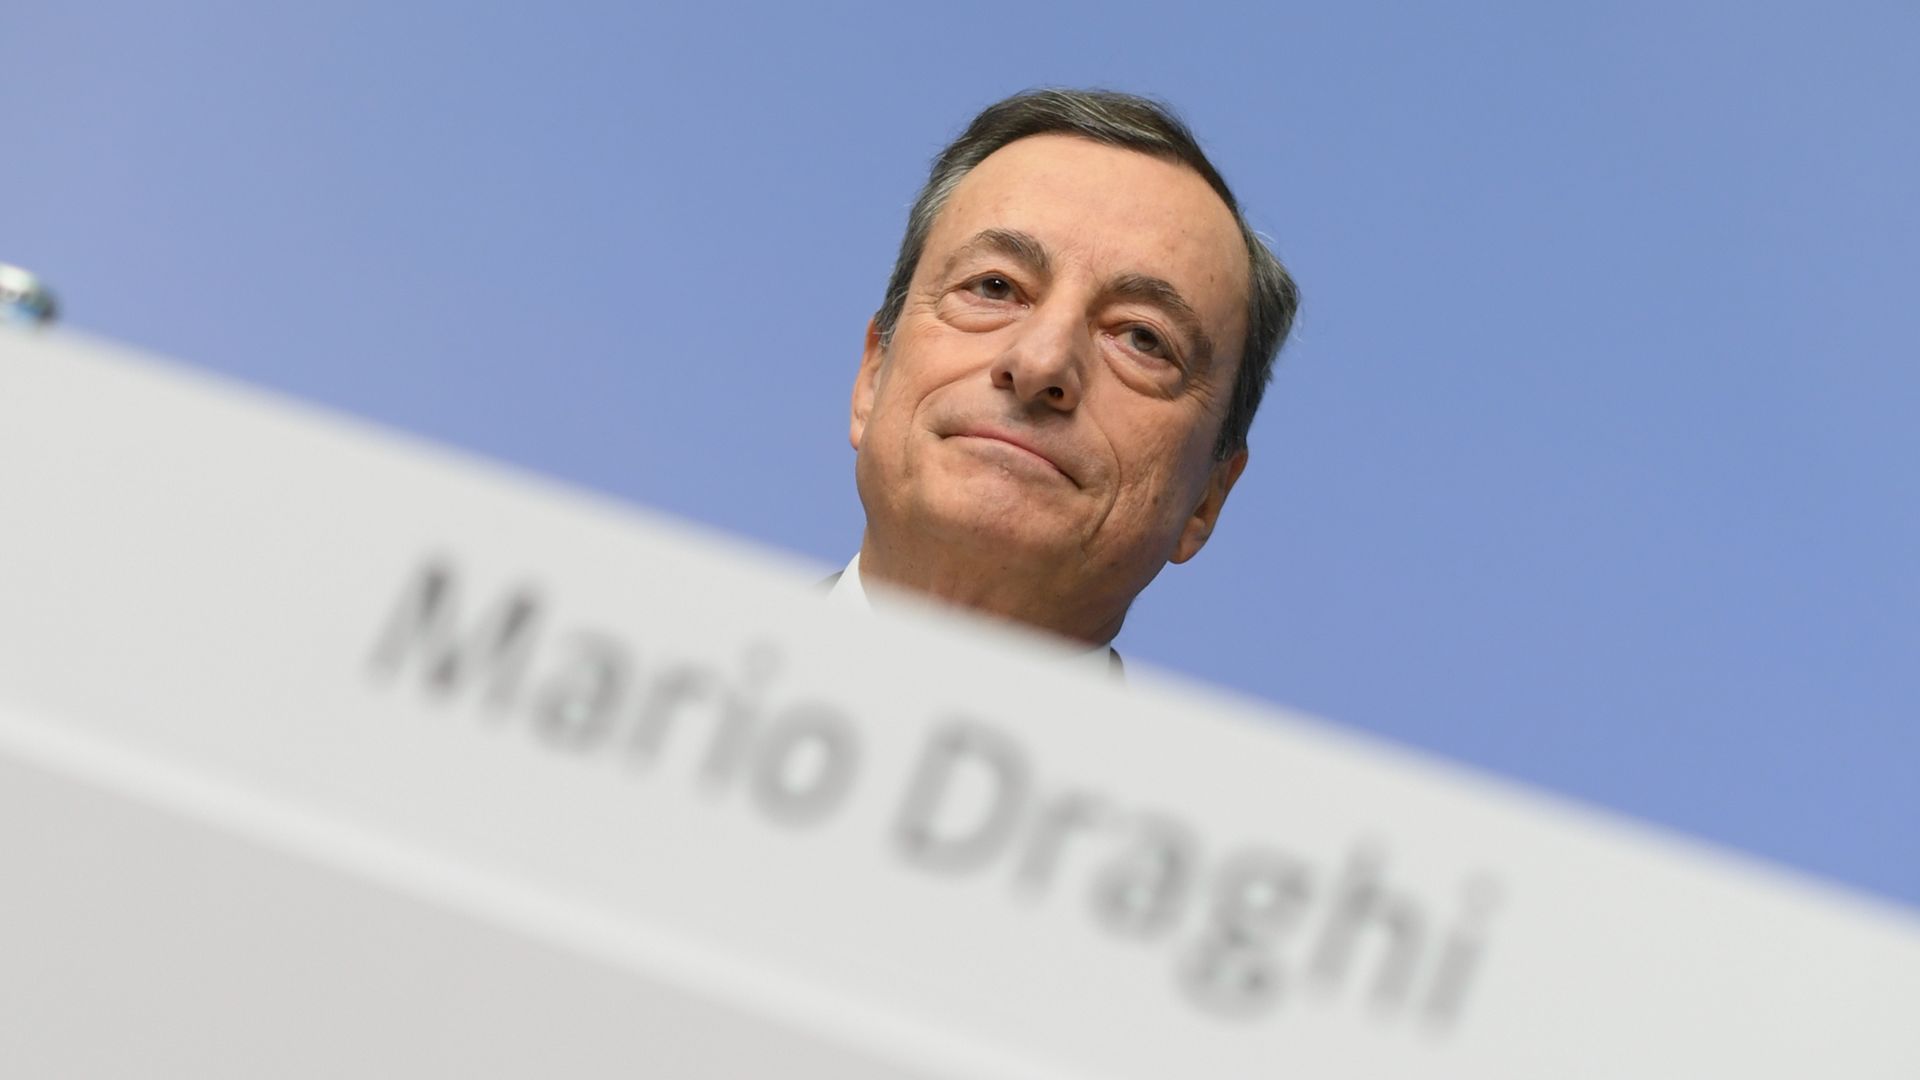 Mario Draghi, the director of the European Central Bank (ECB), at a press conference in the bank's headquarters in Frankfurt, Germany, 26 October 2017.